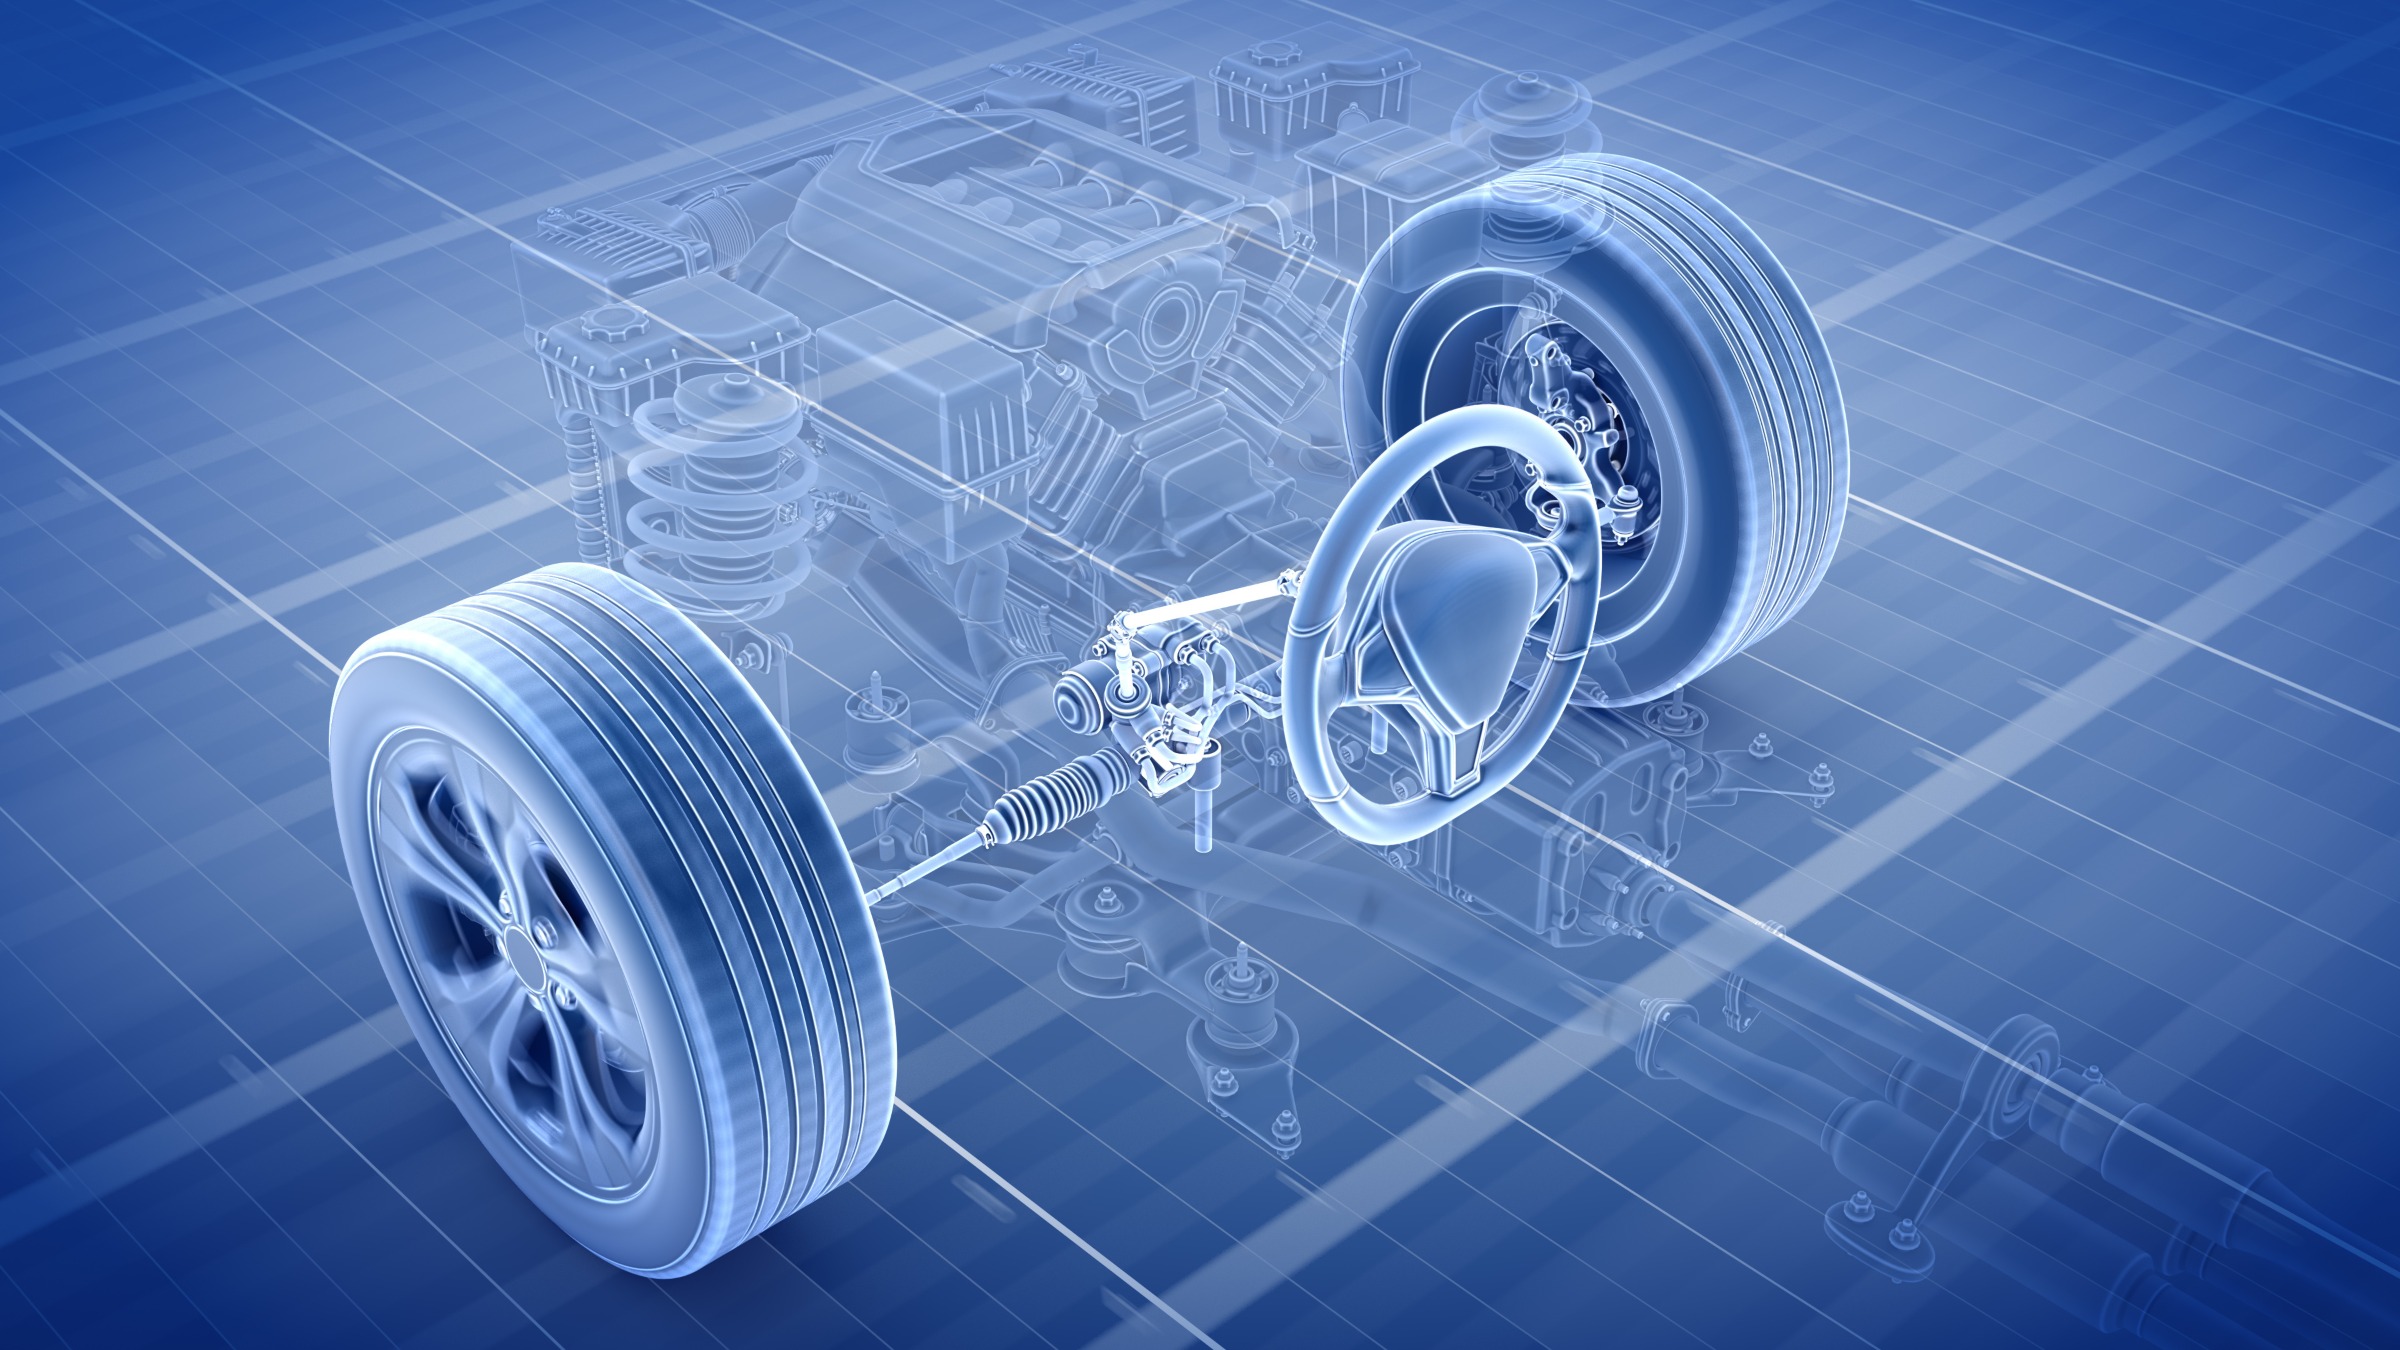 Supplier component cost optimization in automotive